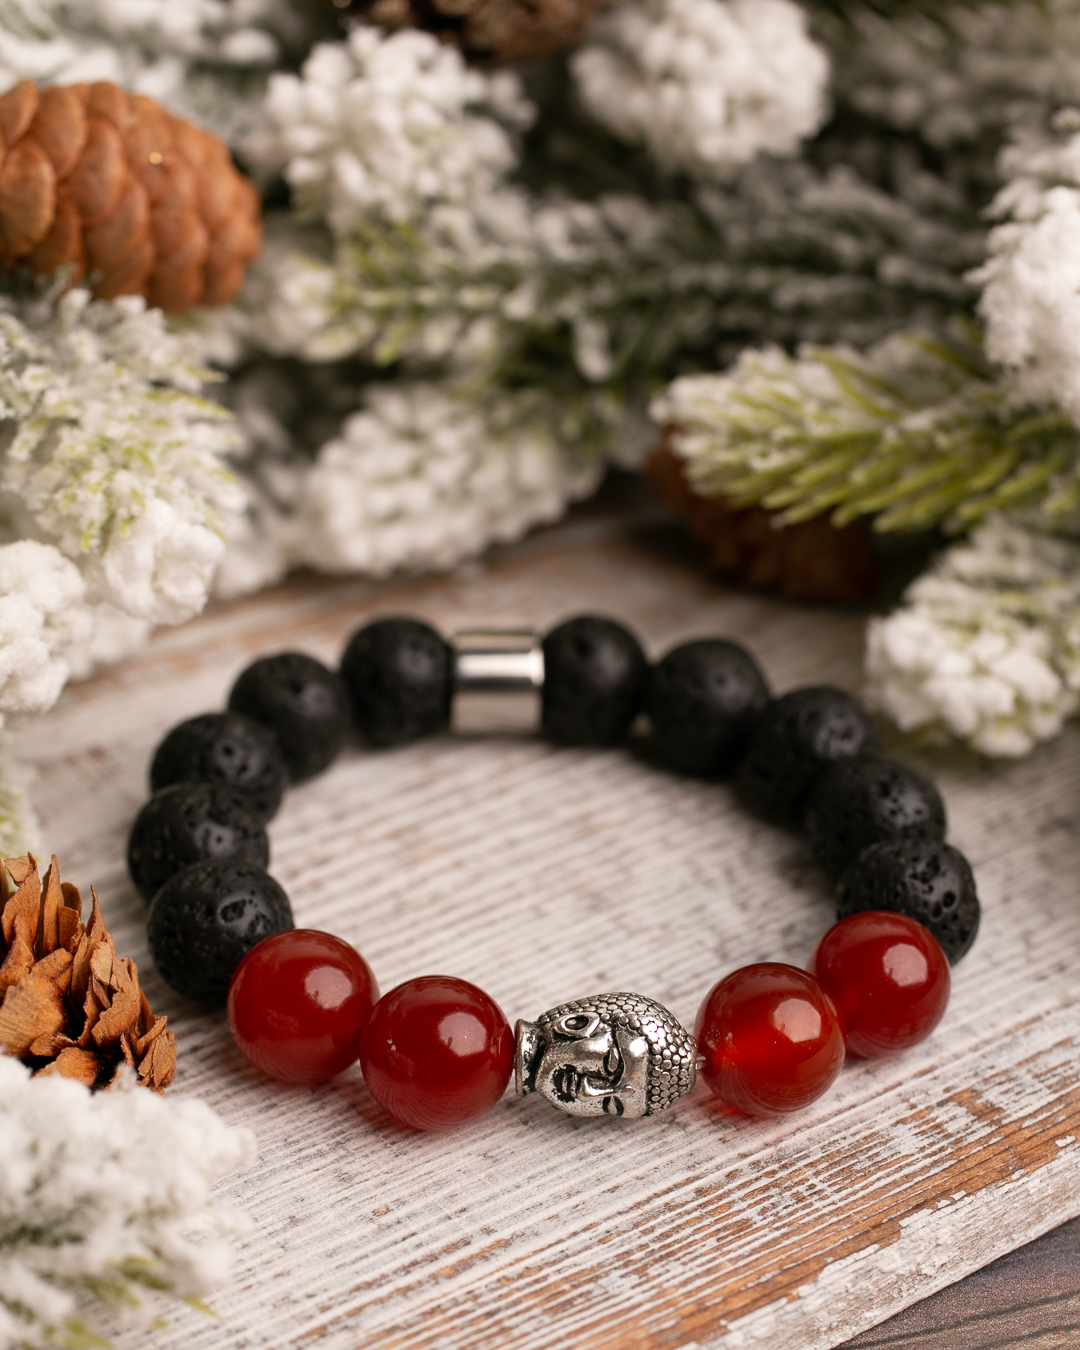 Garnet Strength and Courage Bracelet Pearls 6 or 8 mm Carnelian and Sunstone